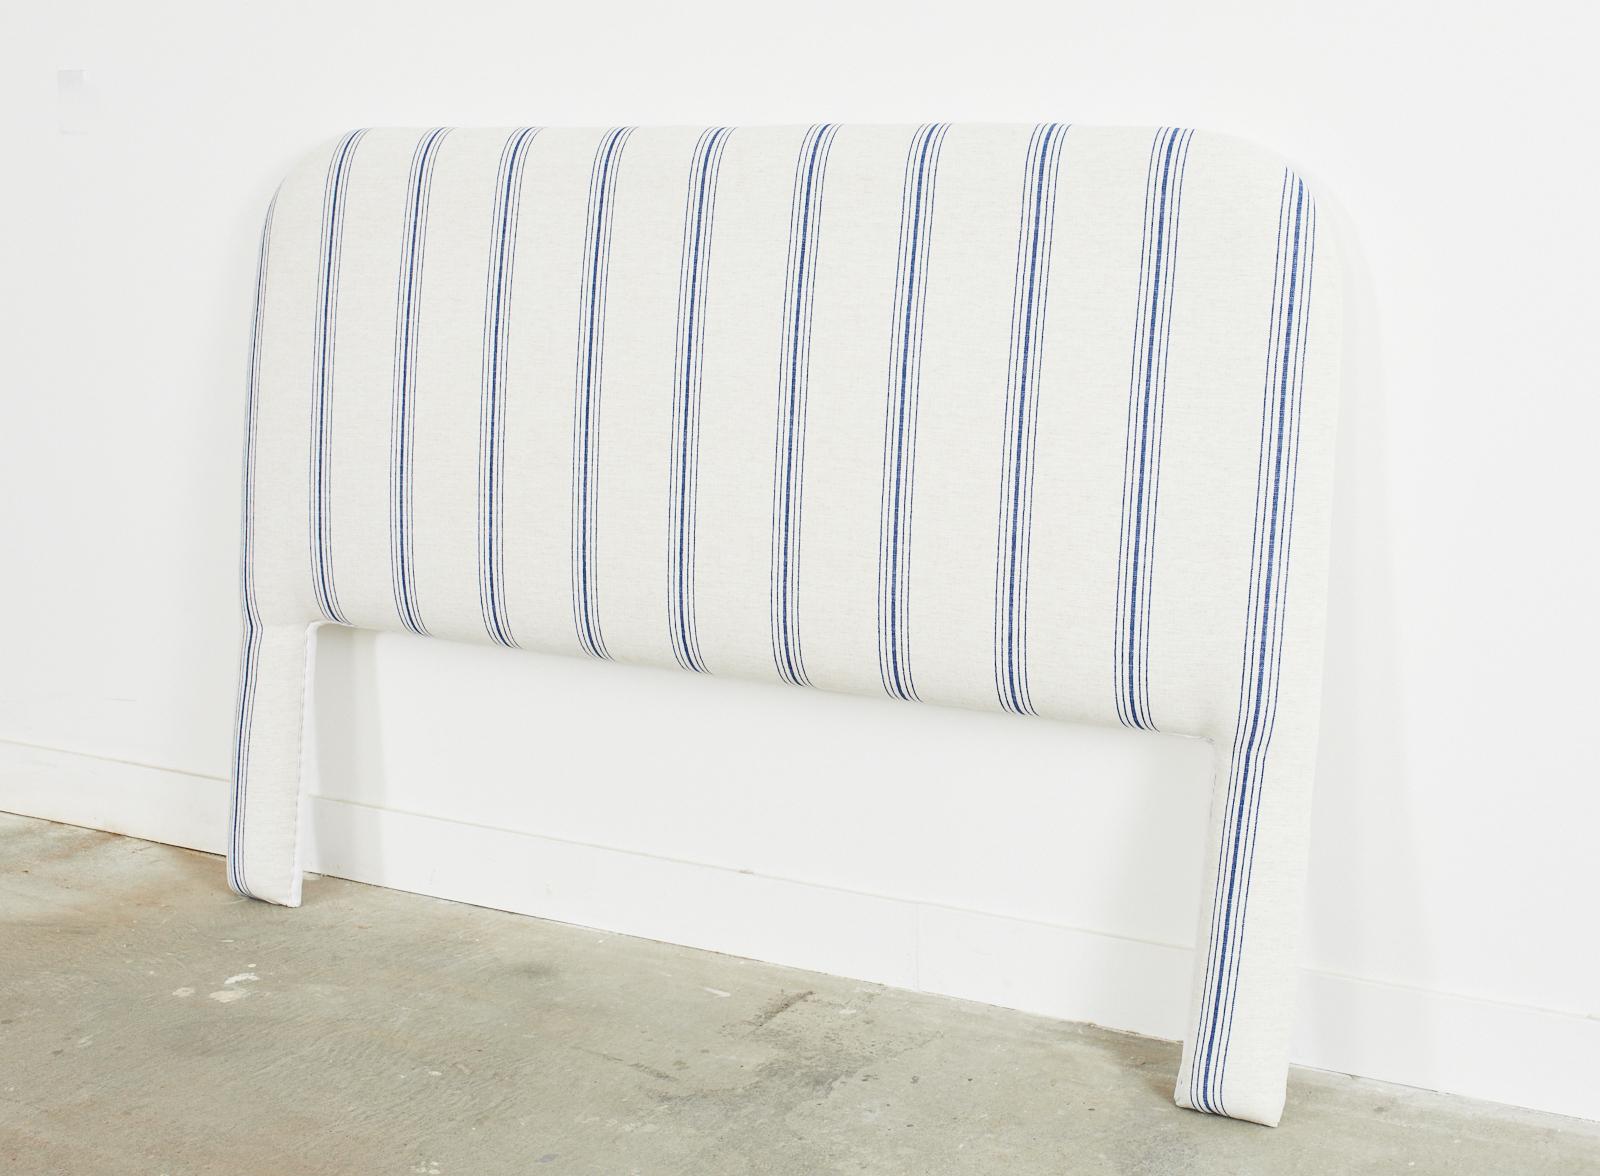 Stylish Cal king newly padded headboard redux featuring a soft striped blue and white linen style upholstery. The striped design is decorated with indigo blue and off-white stripes in an aged patina linen. The vintage headboard has a flat top crest